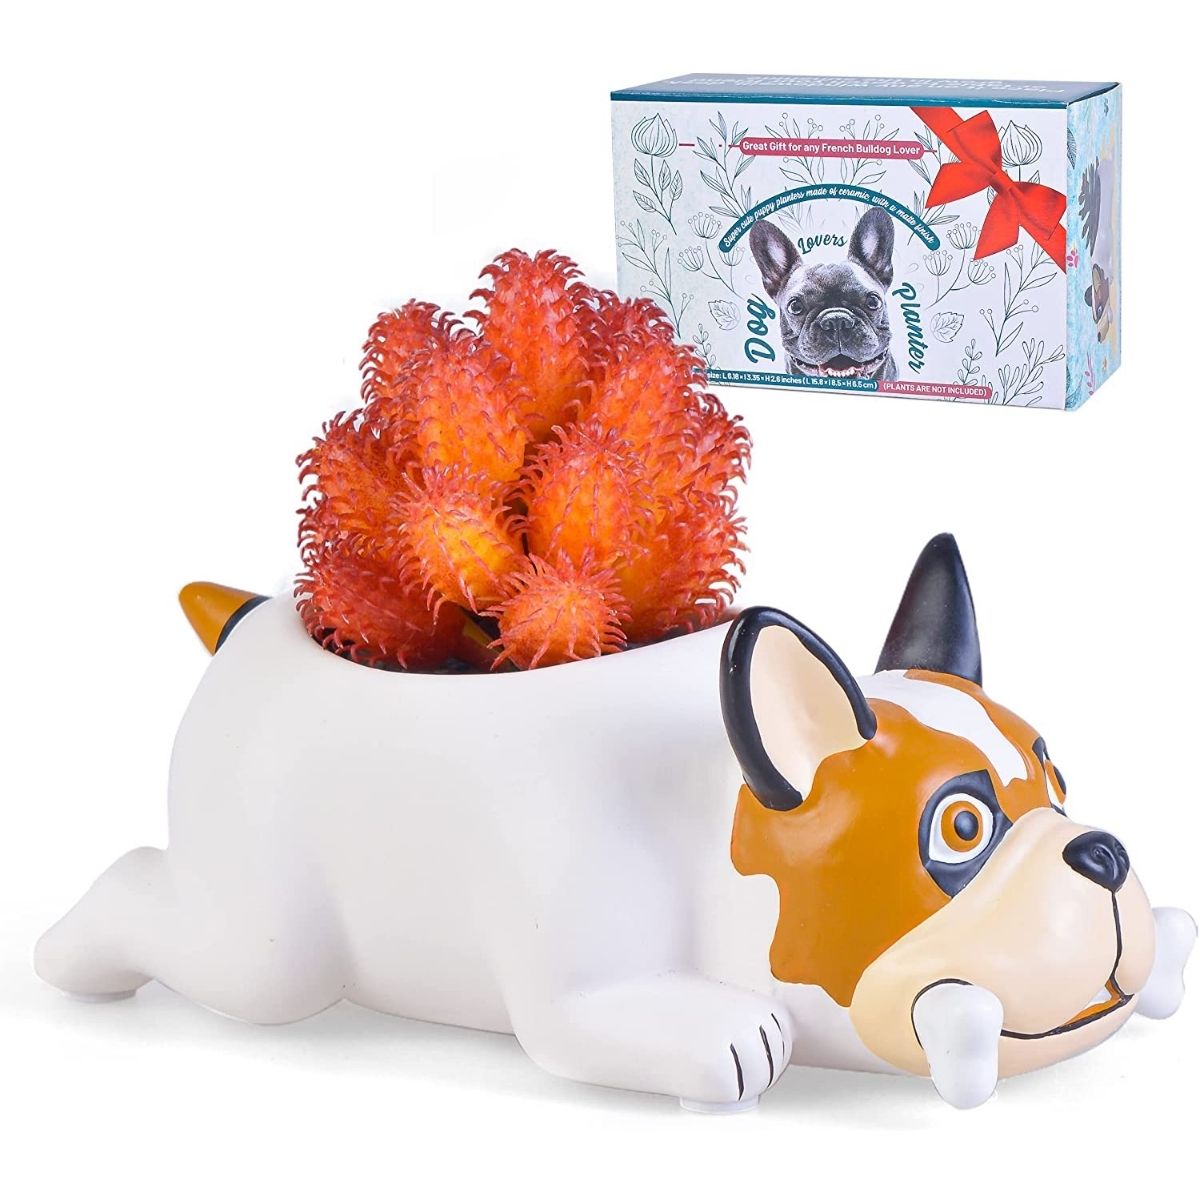 This Mini French Bulldog Planter Is The Perfect Holiday Gift For Pooch Moms